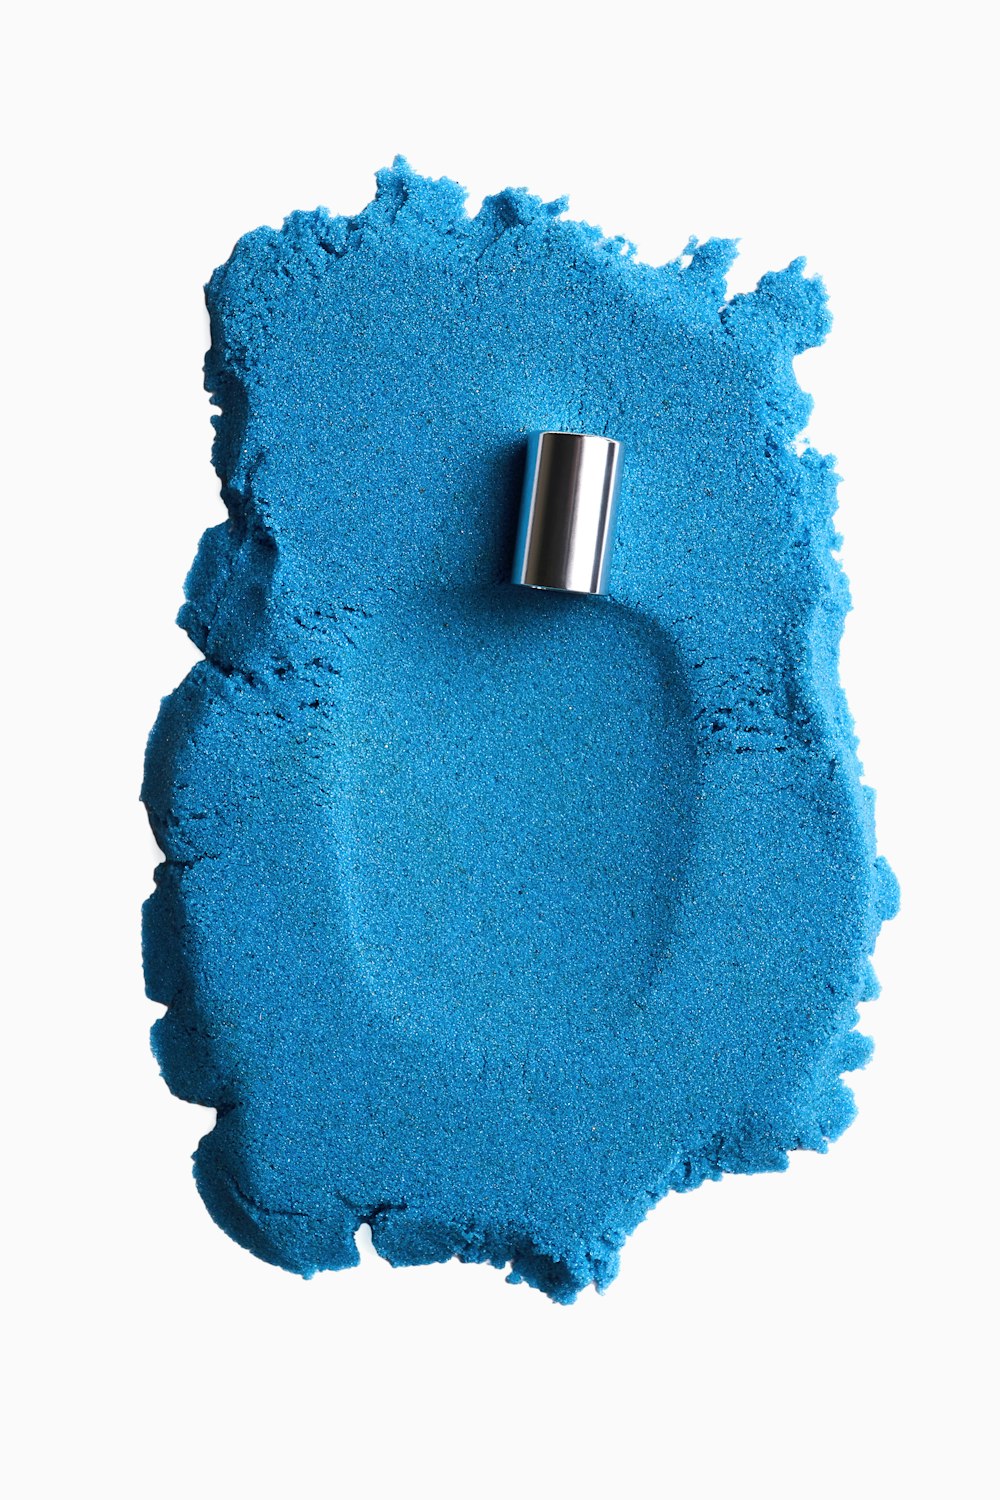 a close up of a blue powdered object